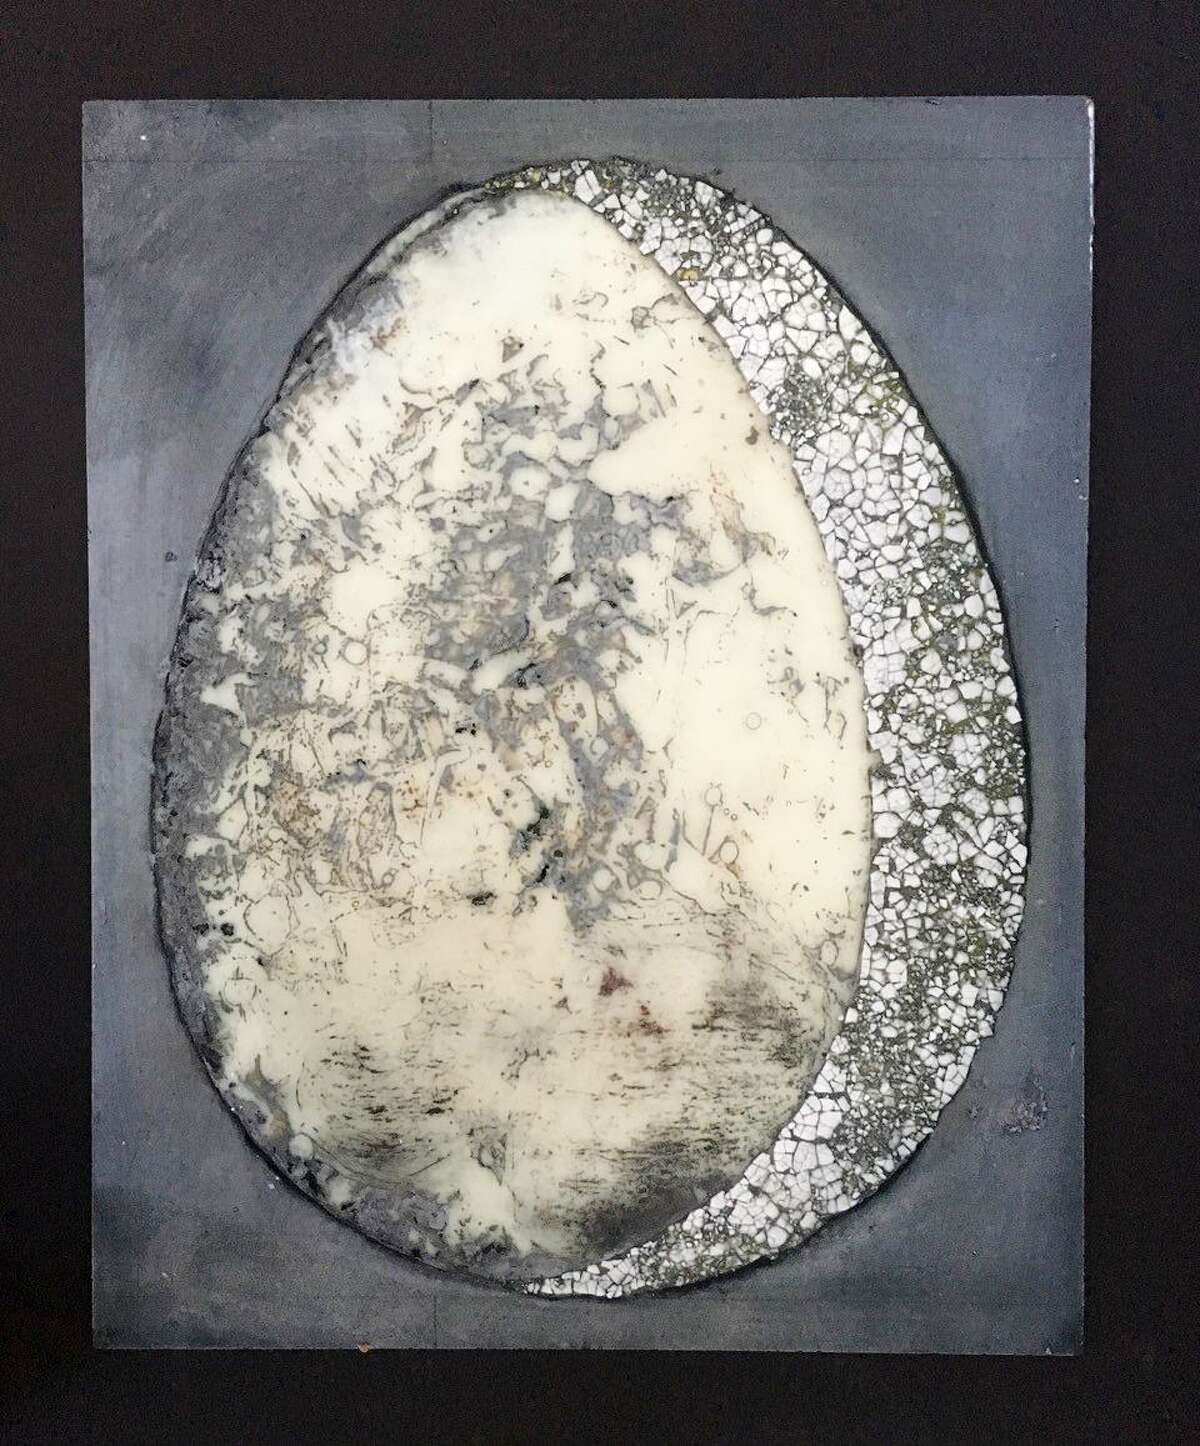 For “Egg Plate,” Linn Cassetta of Westport was named an ”Artist To Watch” by the Carriage Barn Arts Center.